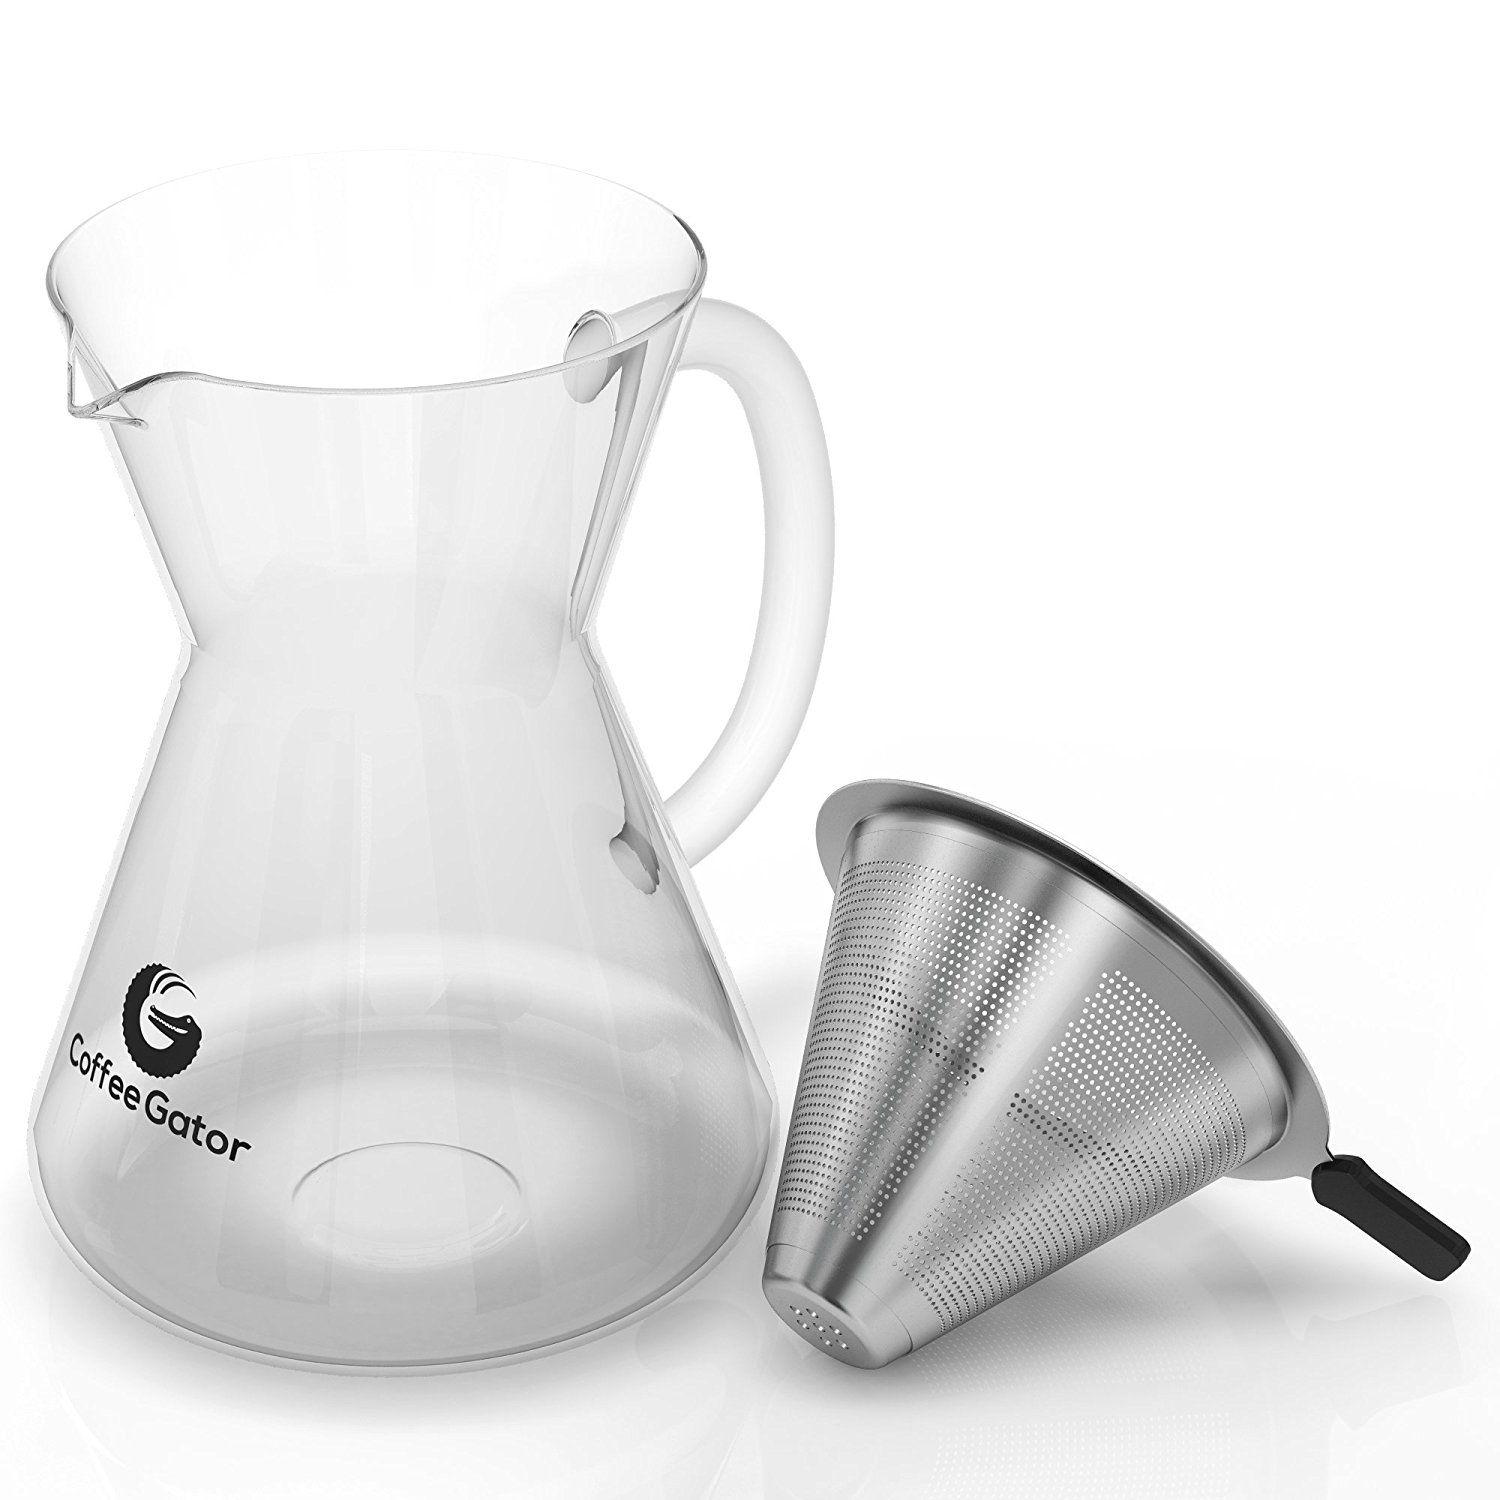 Coffee Gator – Pour Over Coffee Maker